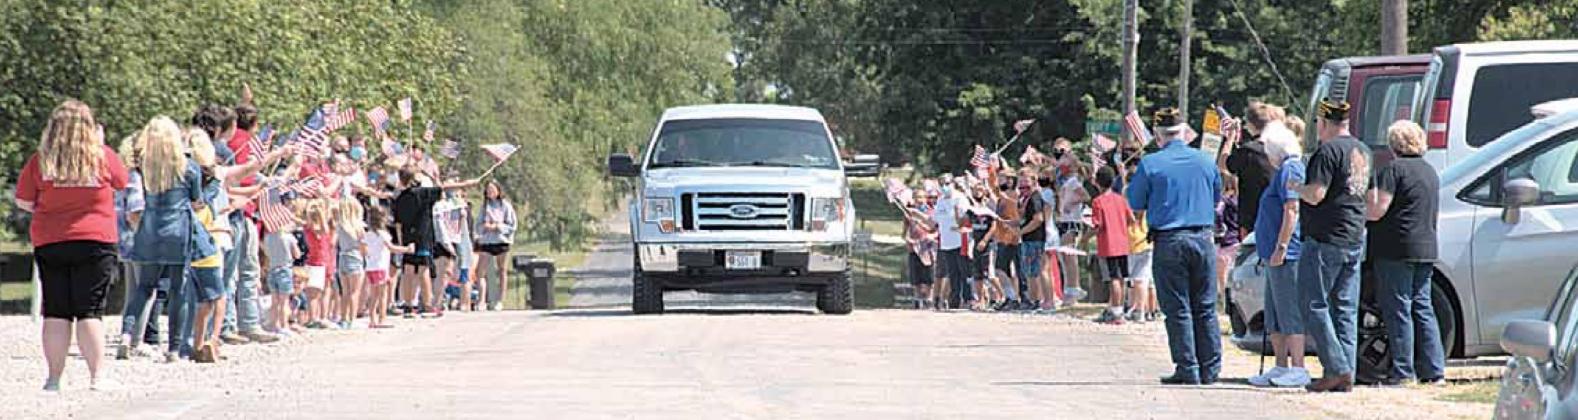 Sgt. Dustin Brethouwer comes up the street to a hero’s welcome. Ray Kappel/Republican